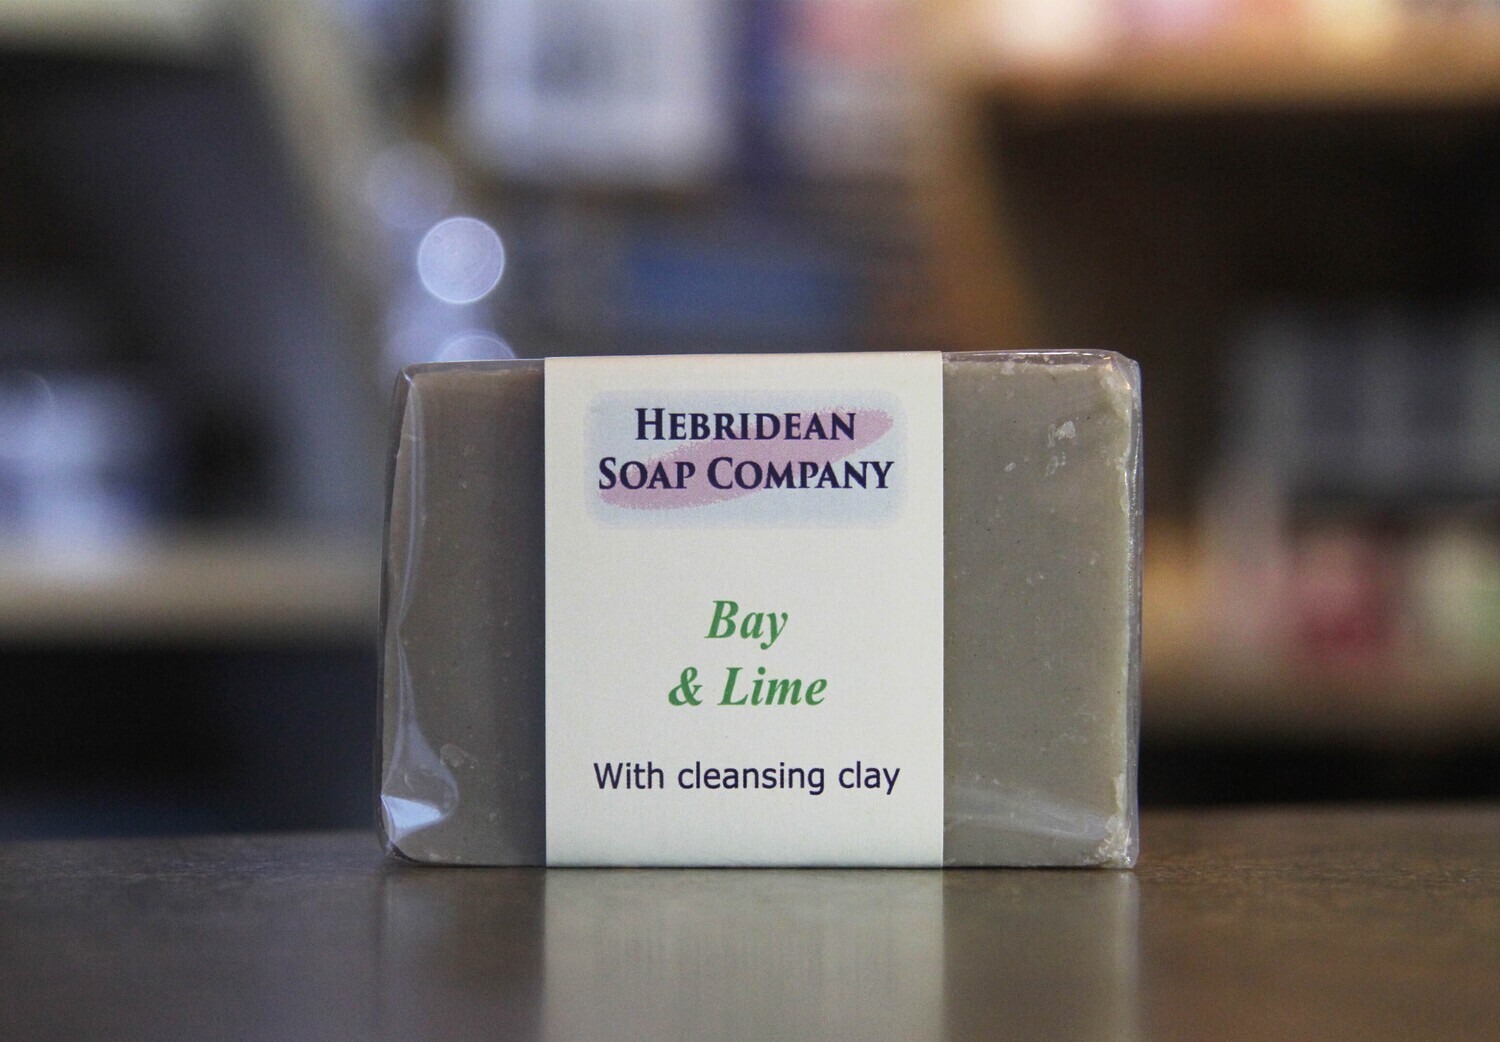 Bay & lime soap